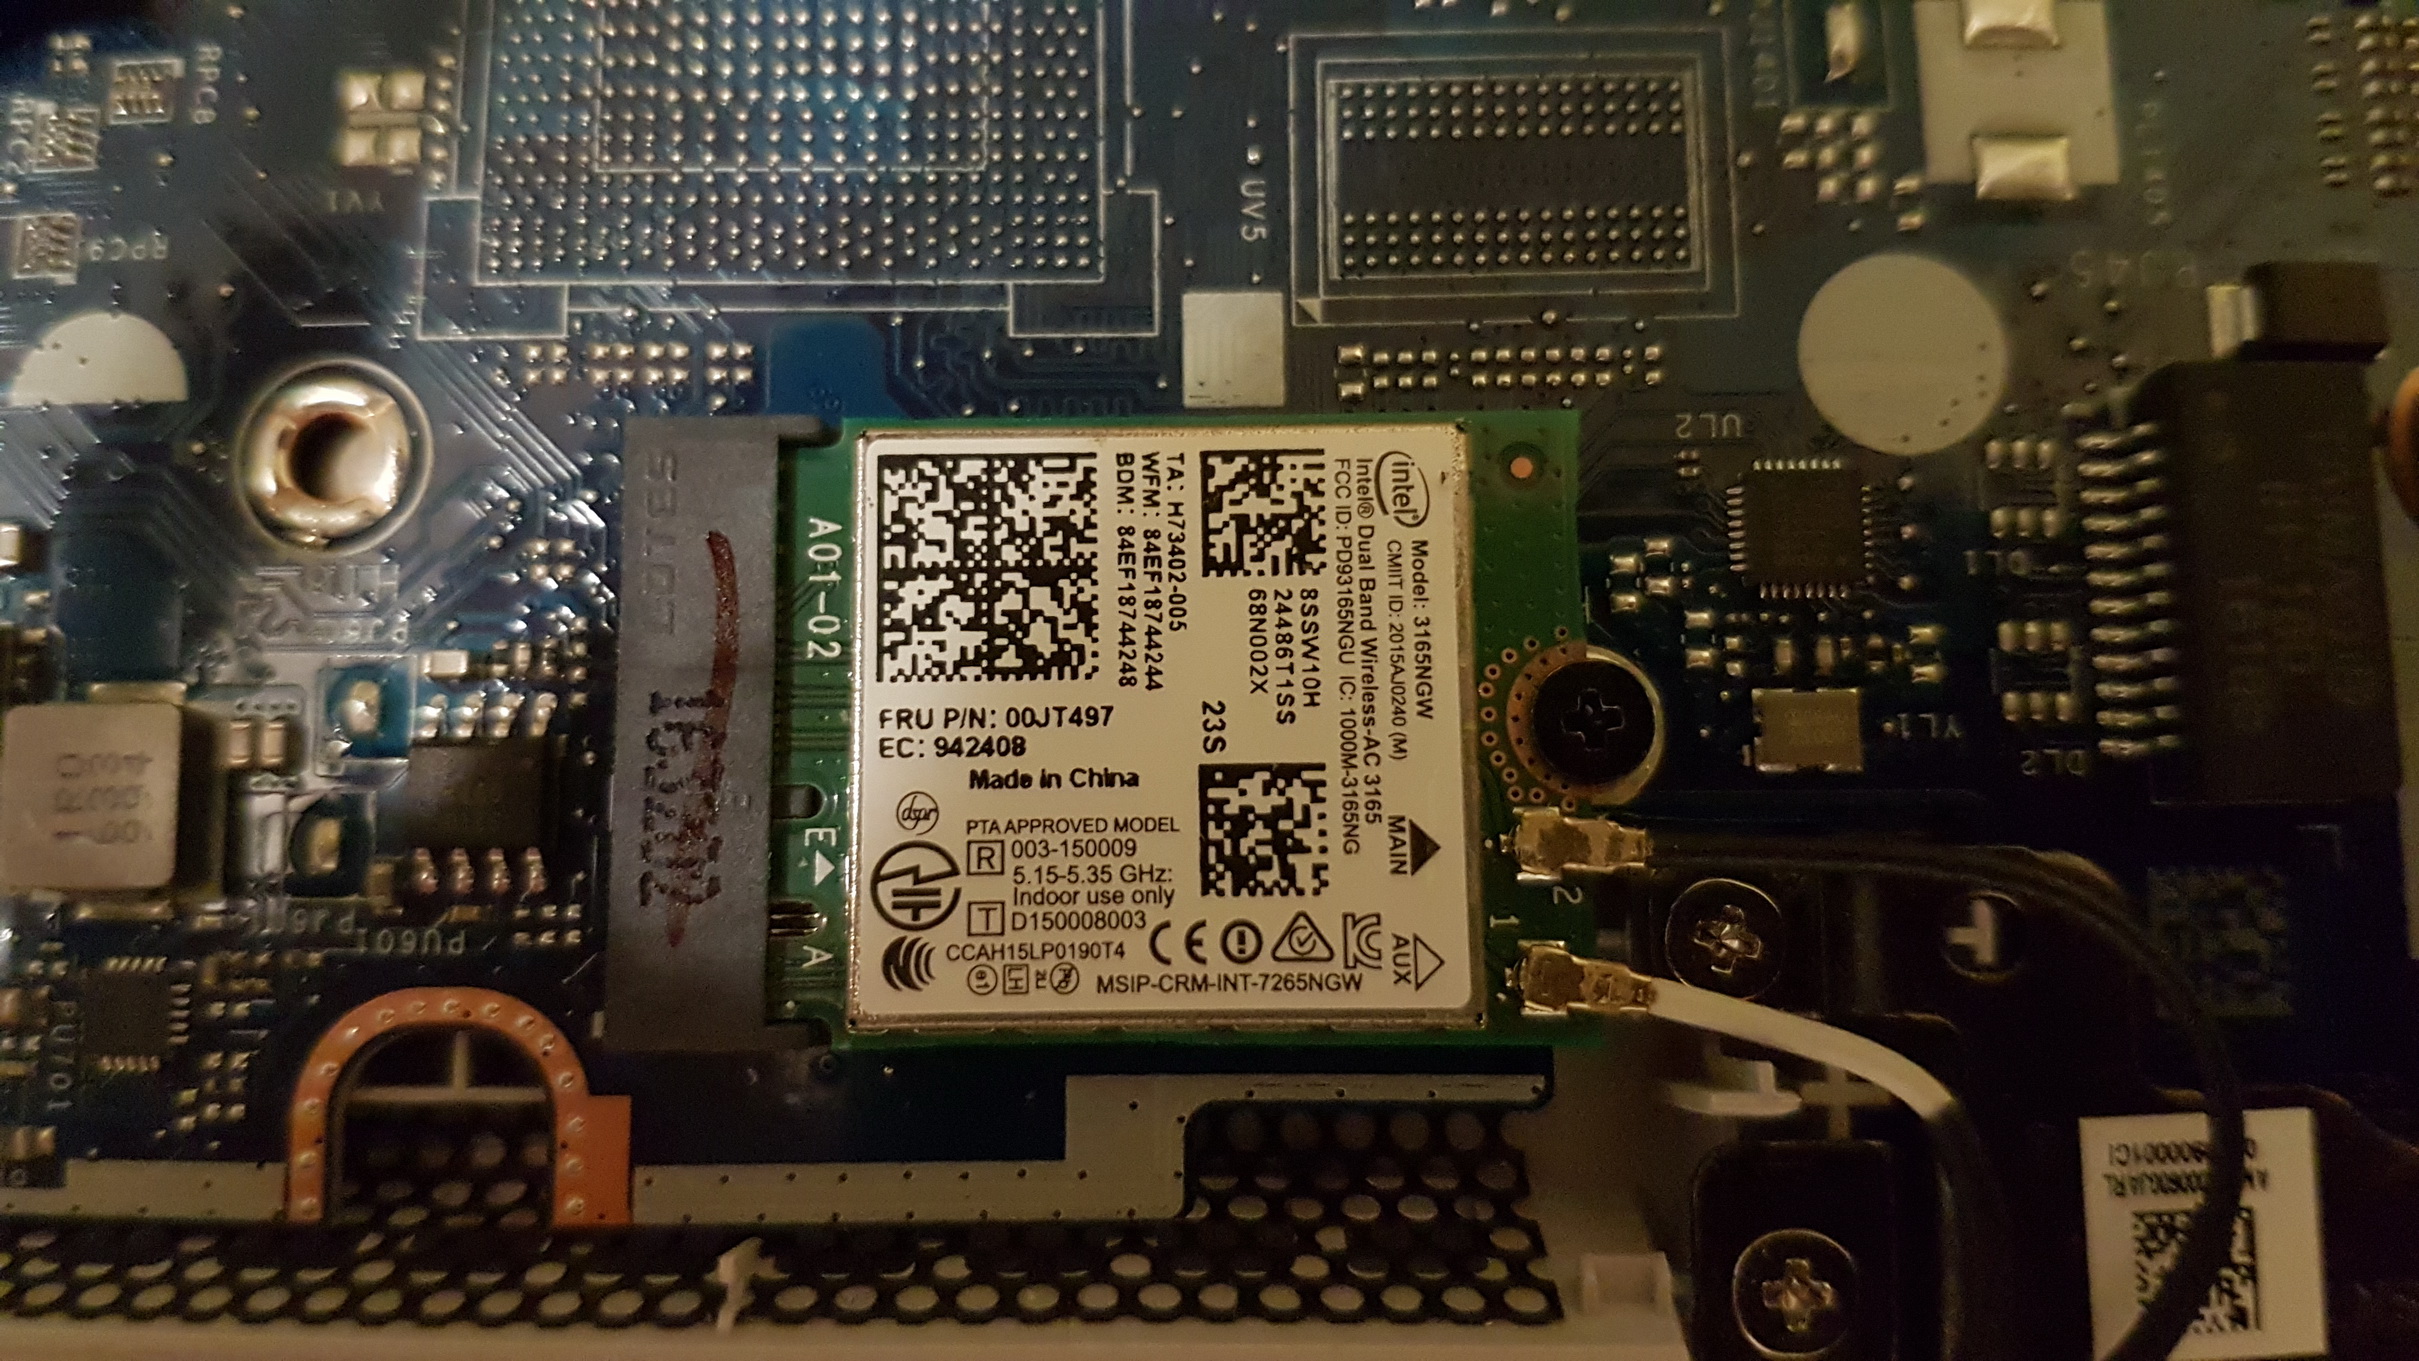 Wireless AC 3165 on my Lenovo Ideapad510S-14IKB will connect only 150  Mbit/s. - Intel Communities